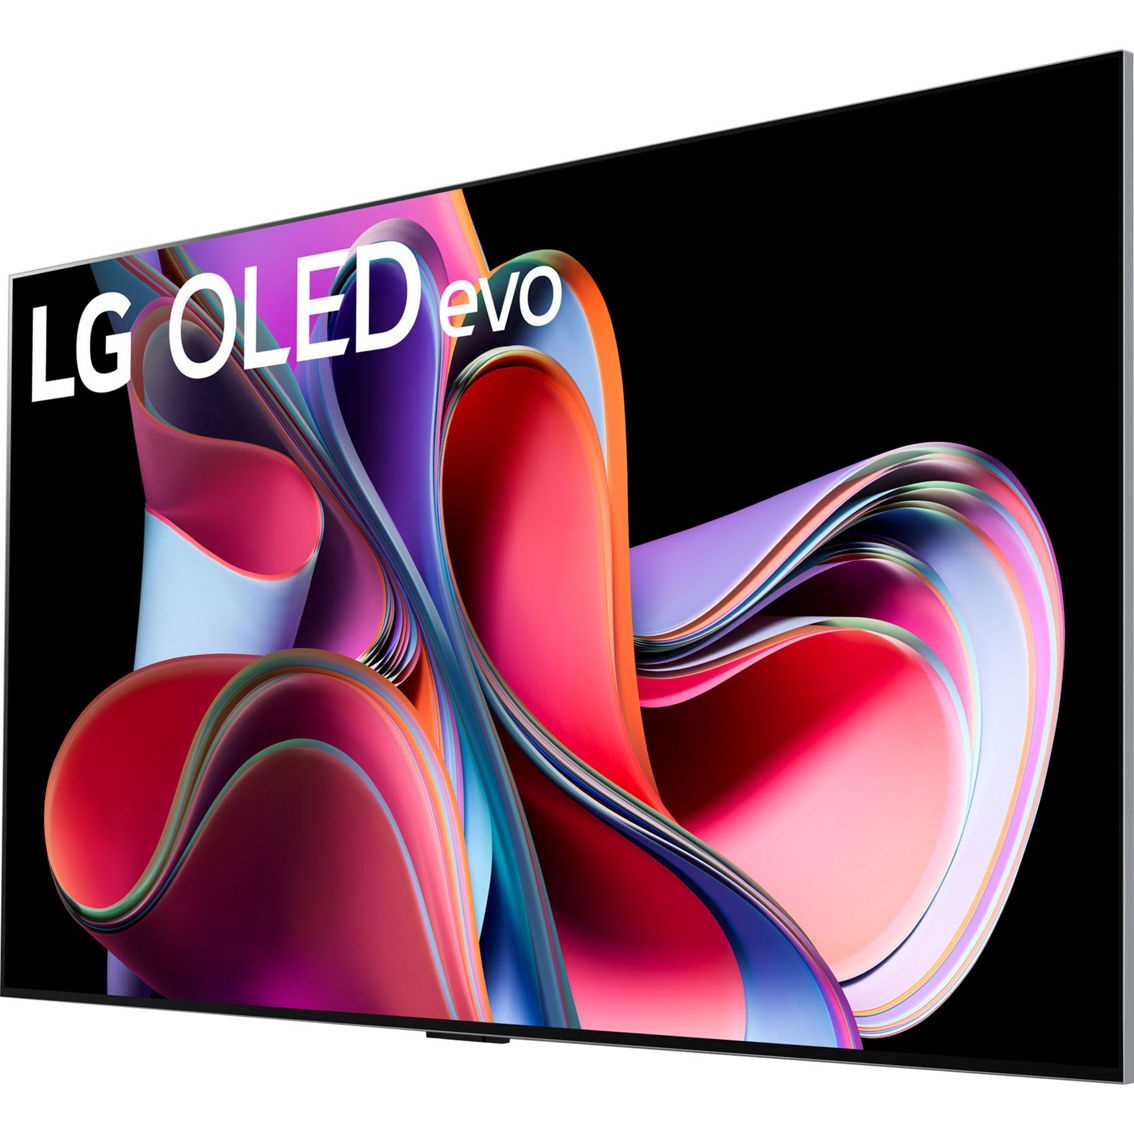 LG 55 in. OLED G3 Evo 4K HDR Smart TV with AI ThinQ and G-Sync OLED55G3PUA - Image 3 of 9